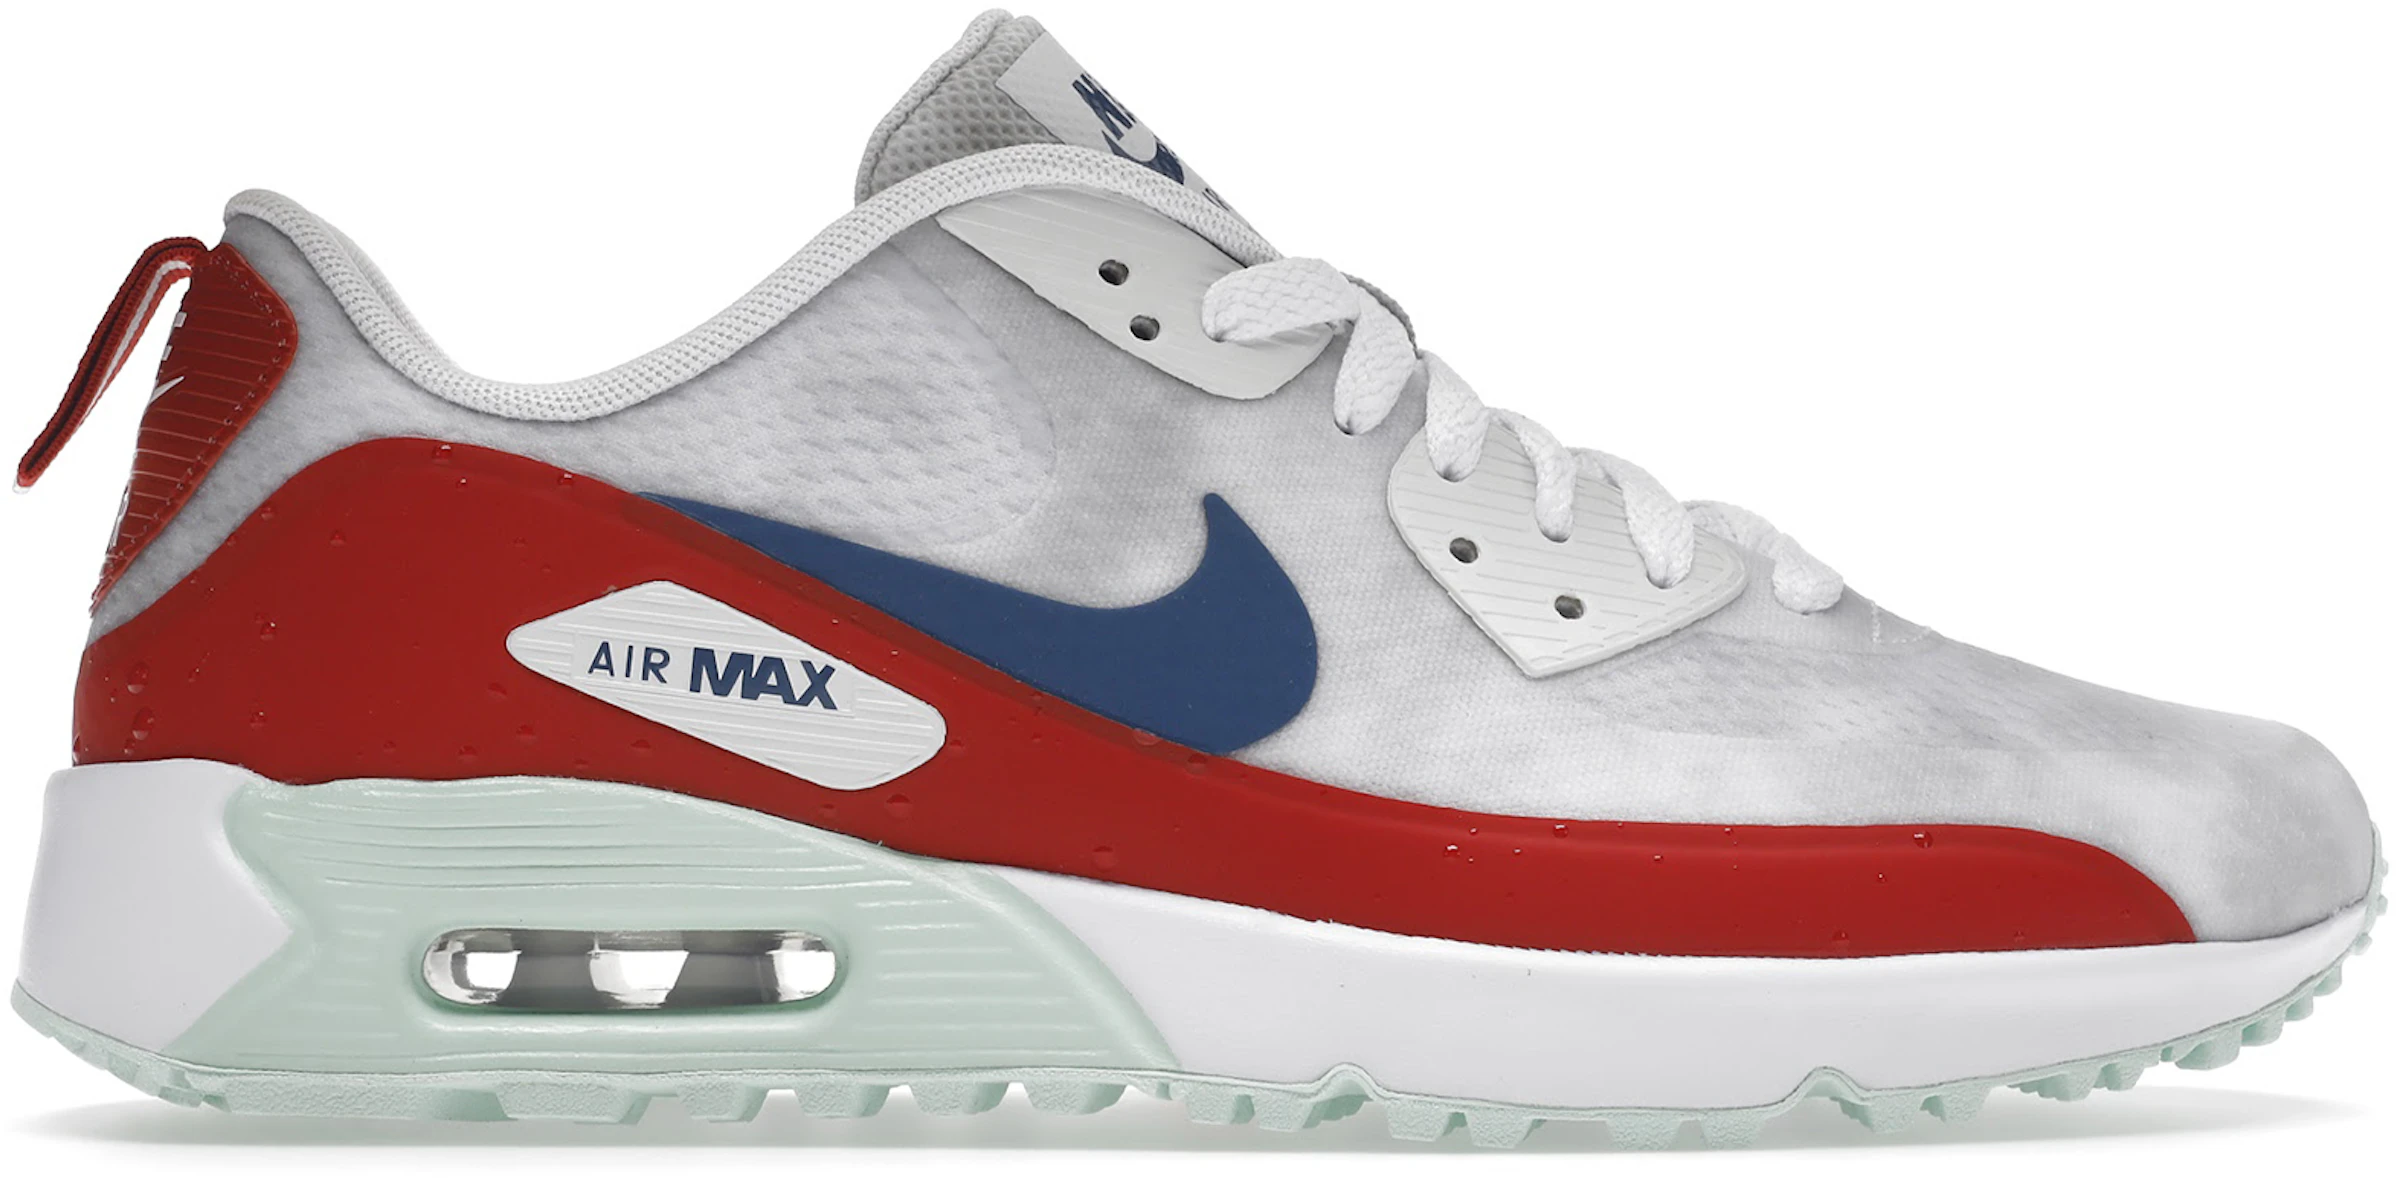 Nike Air Max 90 Golf U.S. Open and - DM9009-146 -